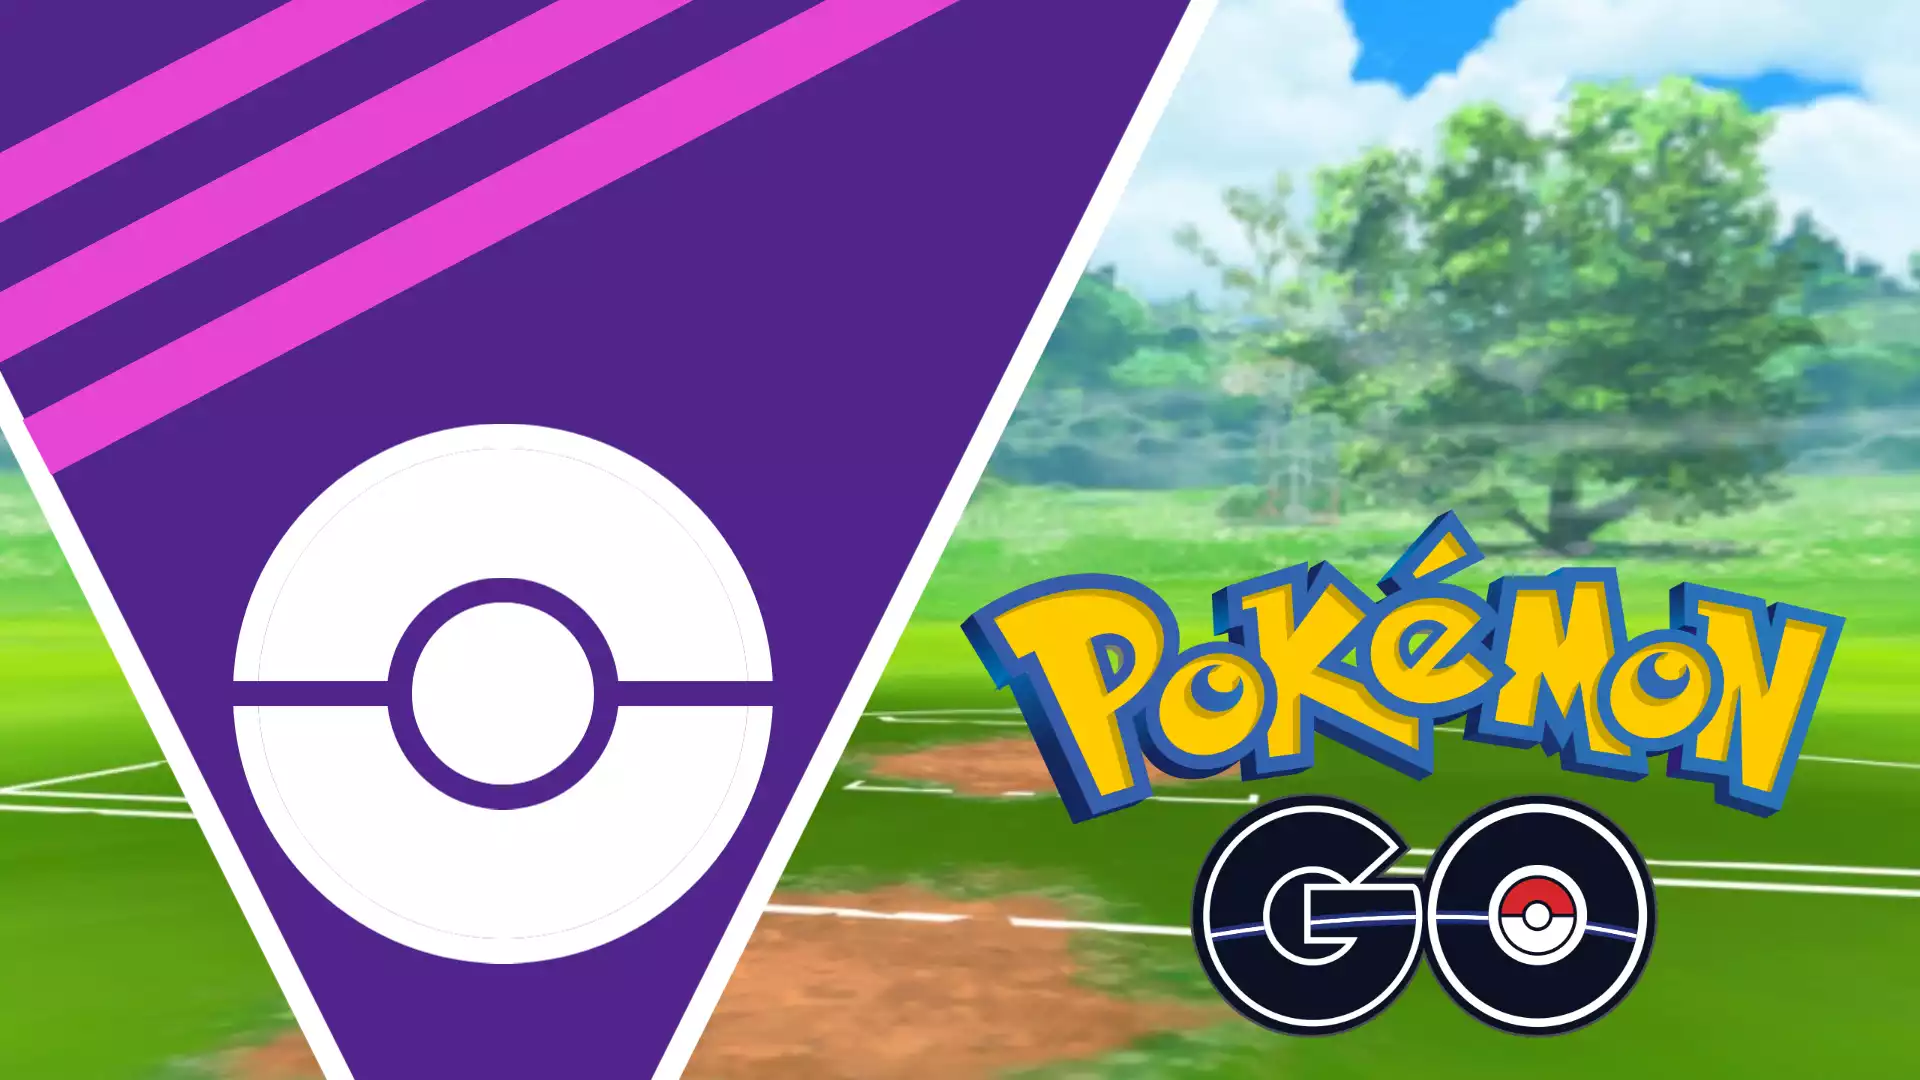 Pokemon GO Master League: Best Team Recommendations For PvP